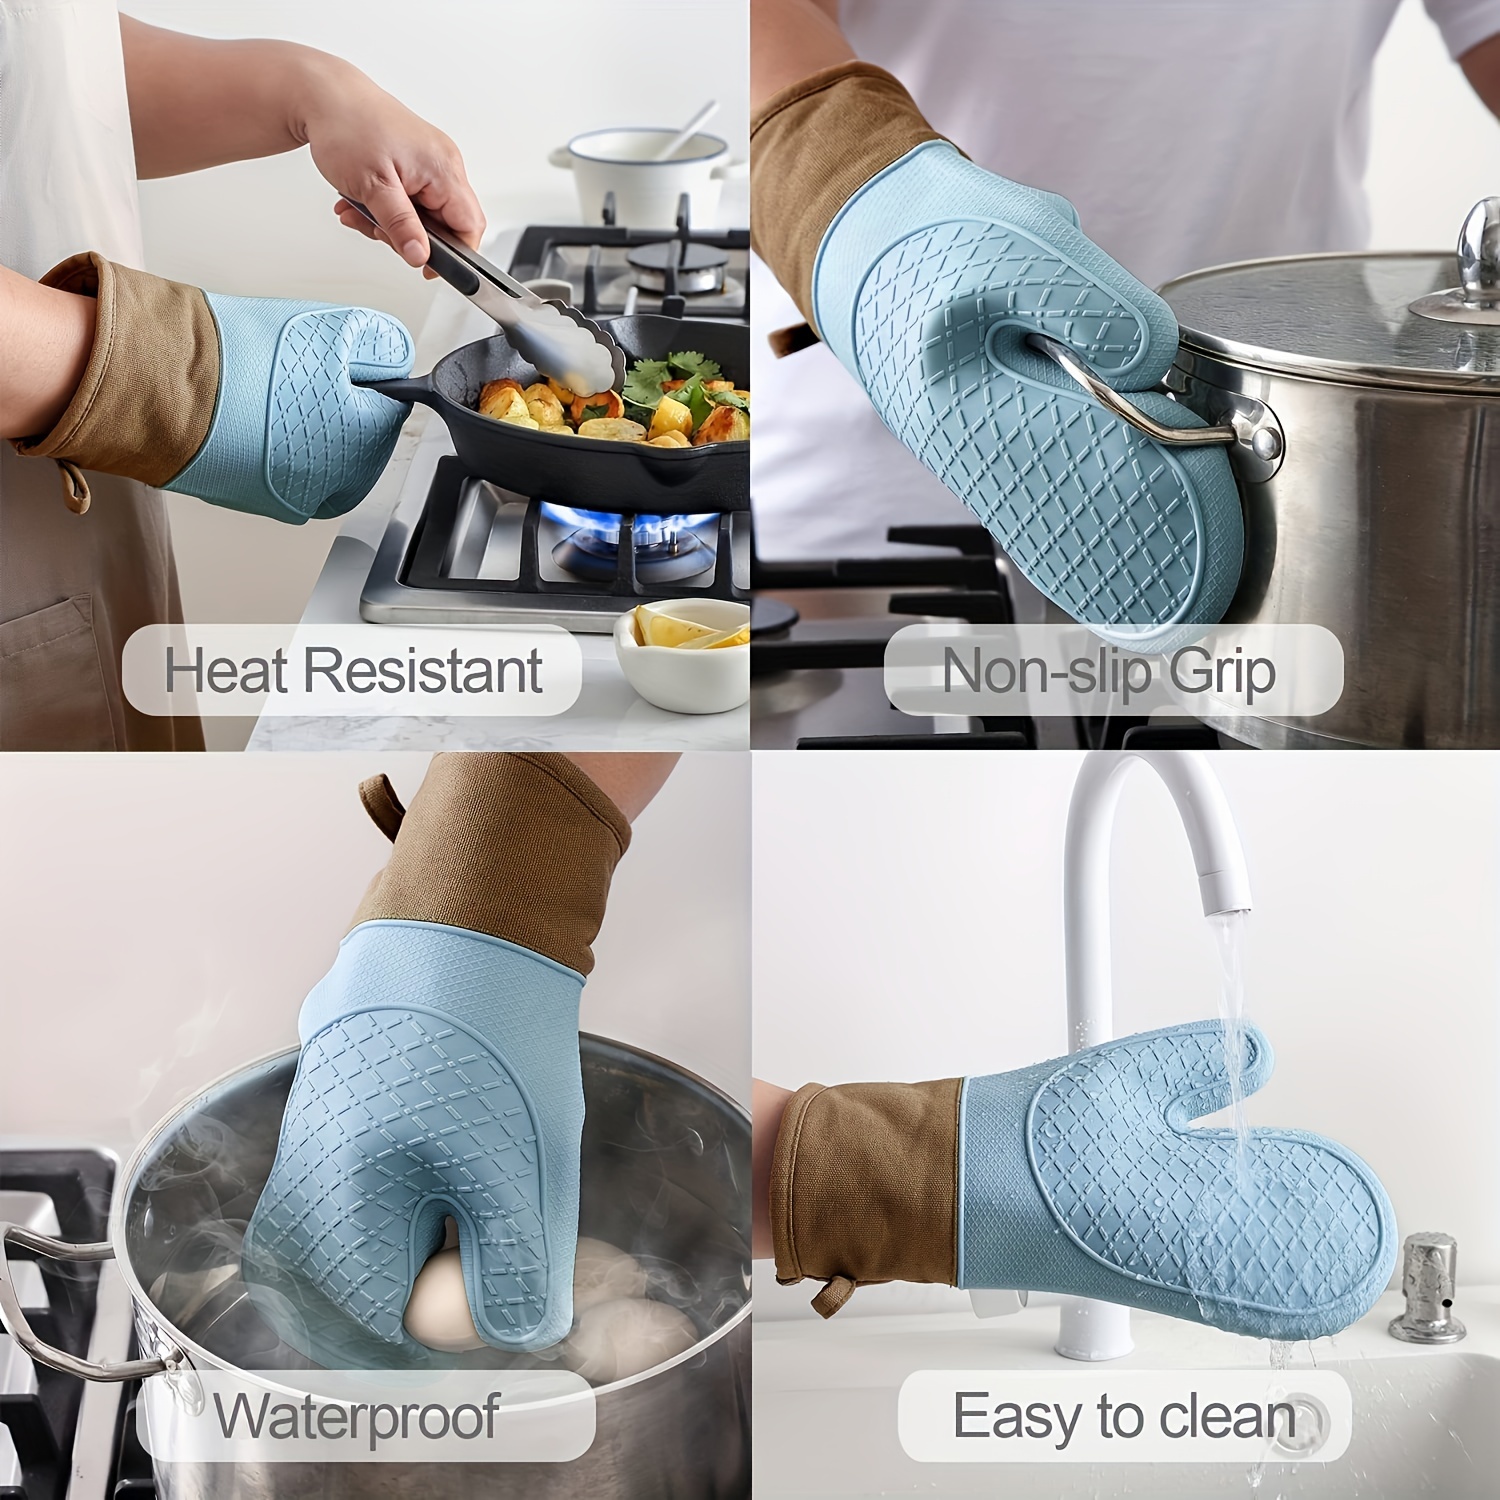 Heat-Resistant Oven Mitts - Set of 2 Silicone Kitchen Oven Mitt